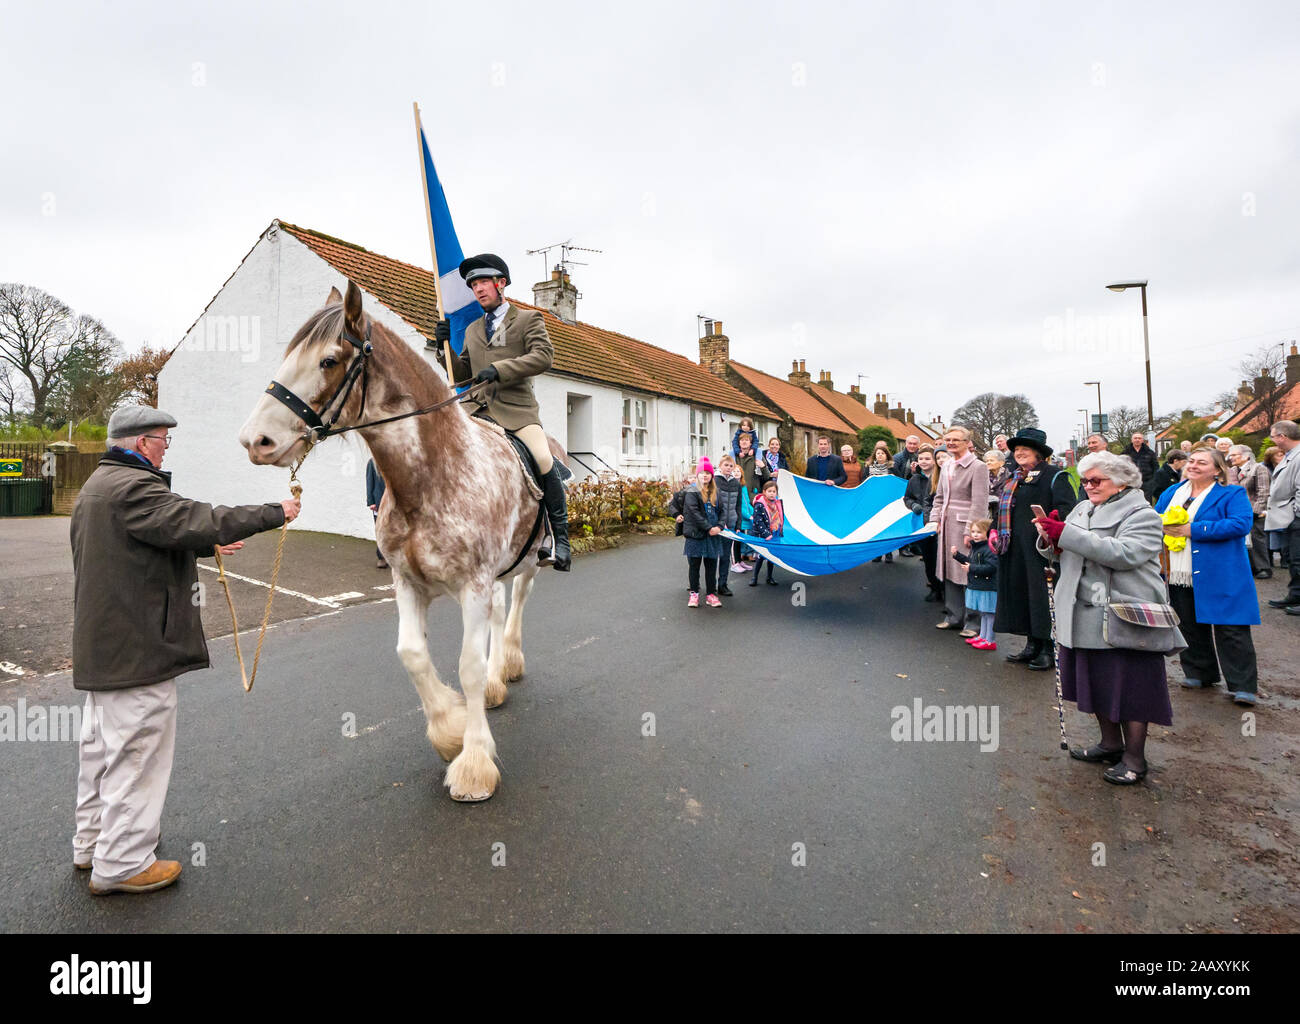 Athelstaneford, East Lothian, Scotland, UK. 24 November 2019. Saltire Festival: The first day of the annual festival to mark St Andrew’s Day takes place in the birthplace of the Scottish national flag where the saltire appeared in the sky as a good omen when the Picts & Scots defeated the Saxons led by Athelstan. Pictured: Craig Donnelly on a Strawberry Roan Clydesdale mare with groom/owner Arthur Greenan with villagers including children parade along the main street carrying a giant saltire flag Stock Photo